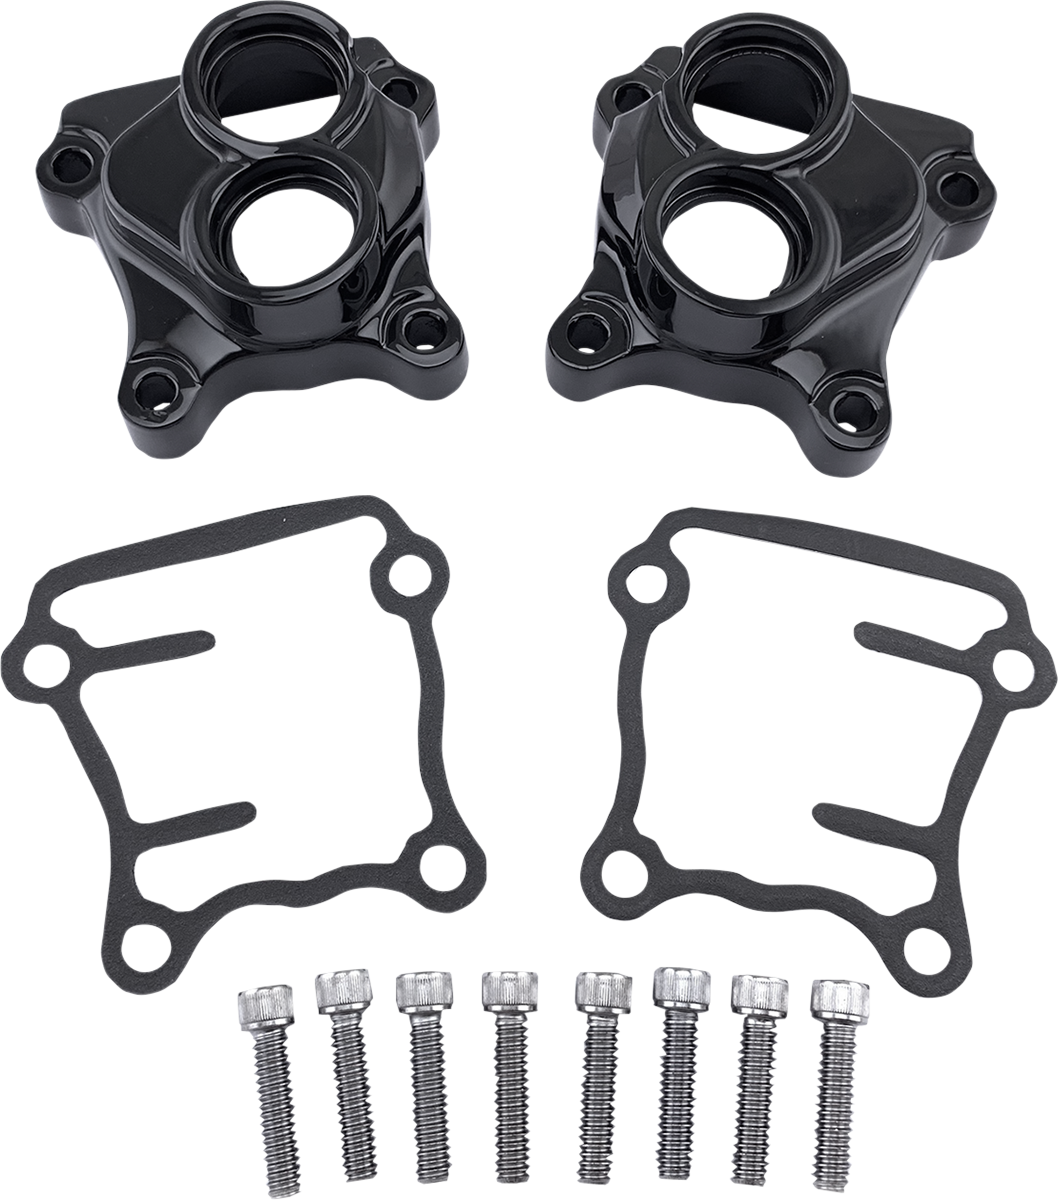 Drag Specialties Black Lifter Block Covers 1999-2017 Harley Dyna Touring Softail